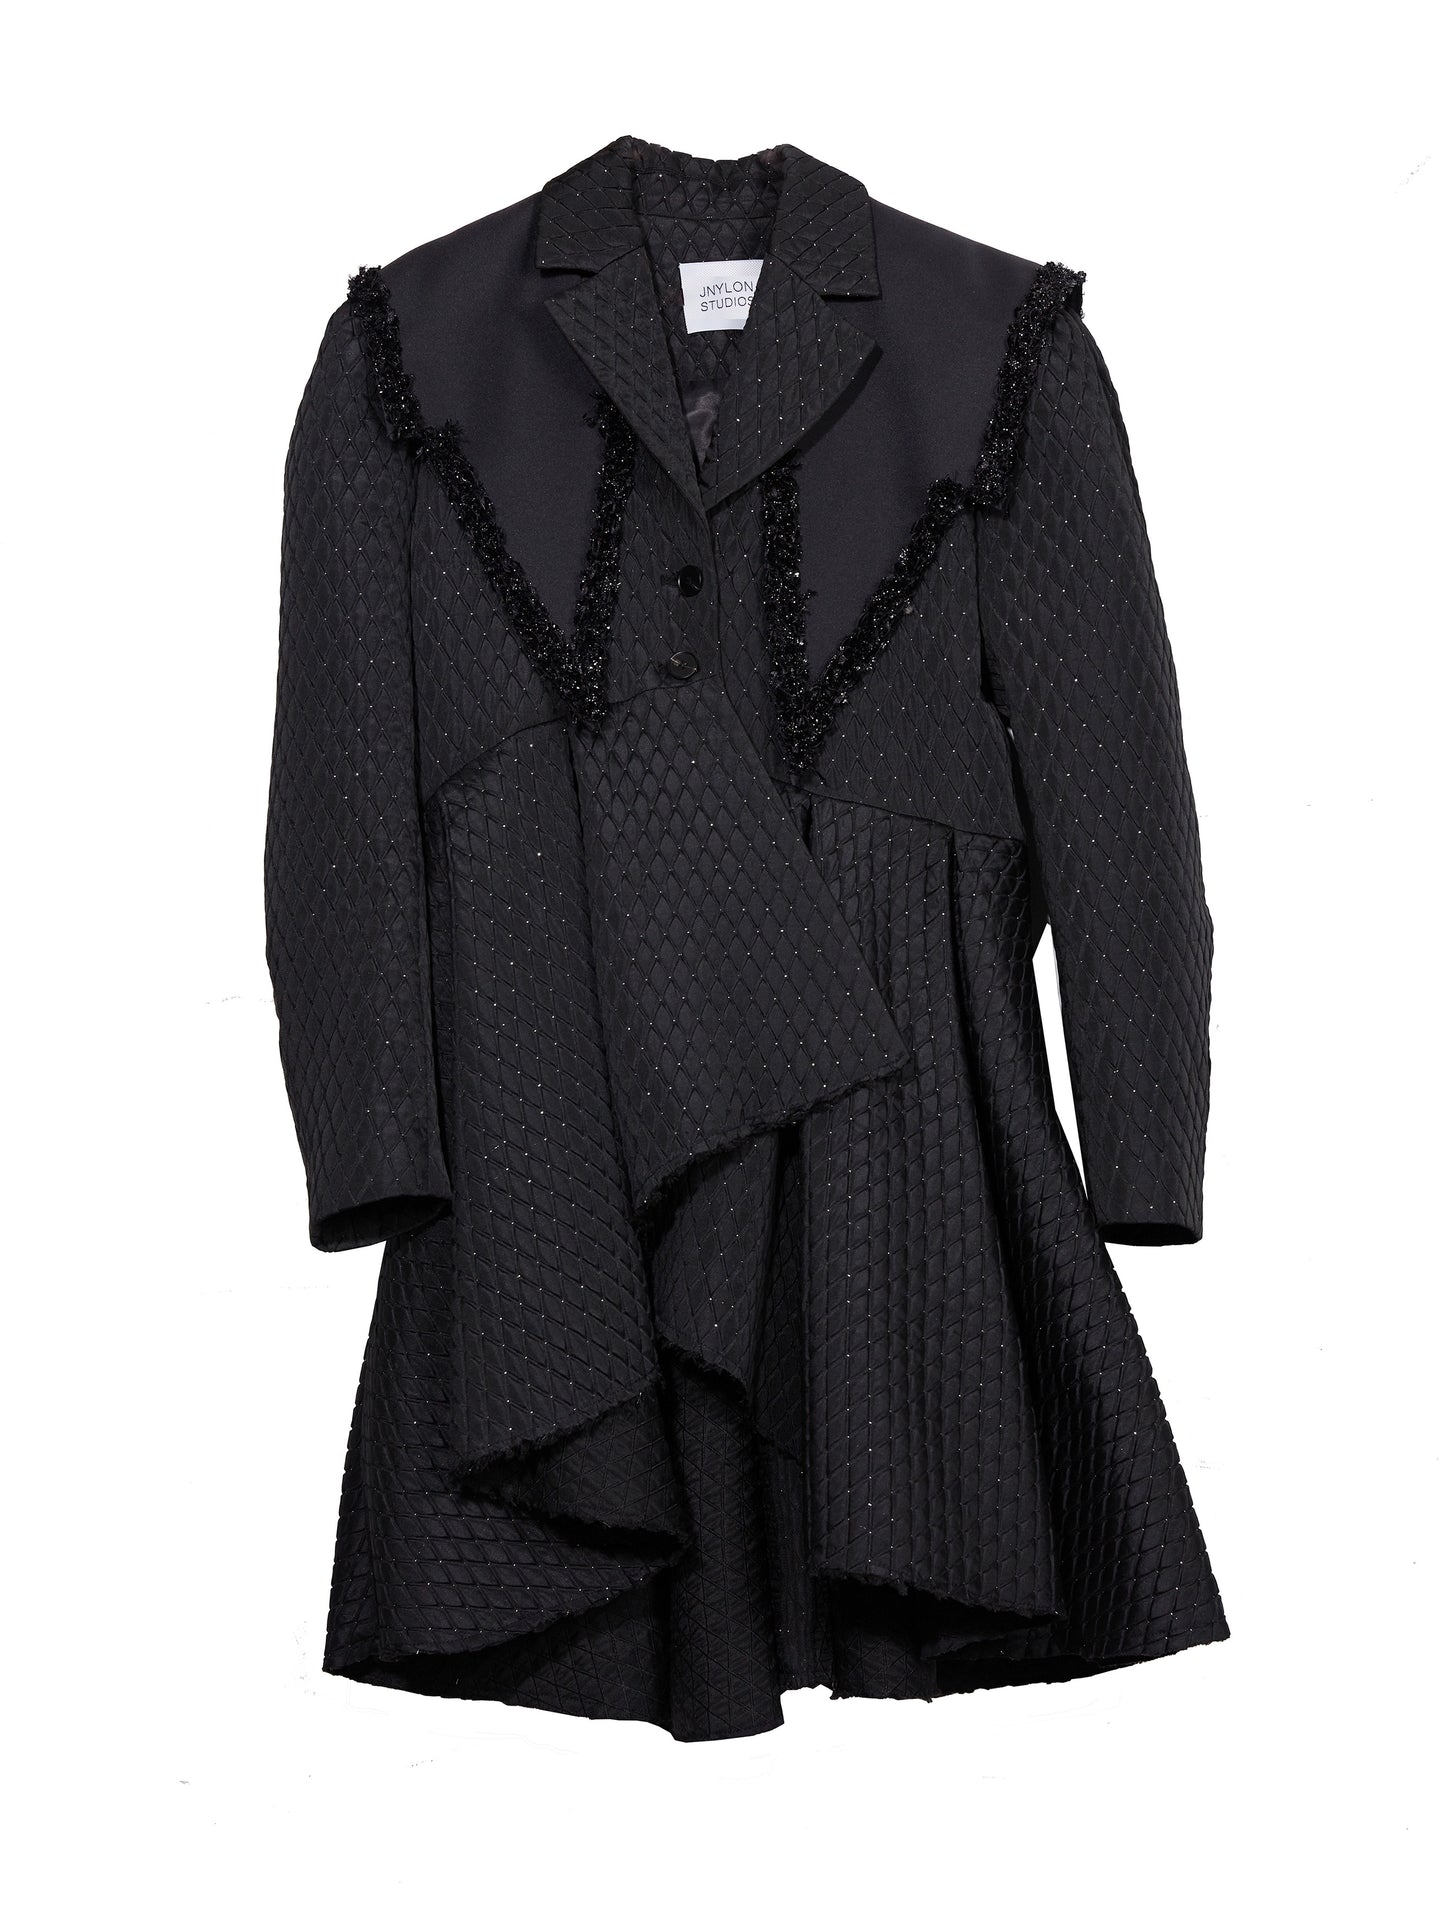 Double Layered Air Cotton Jacquard Skirt Style Jacket